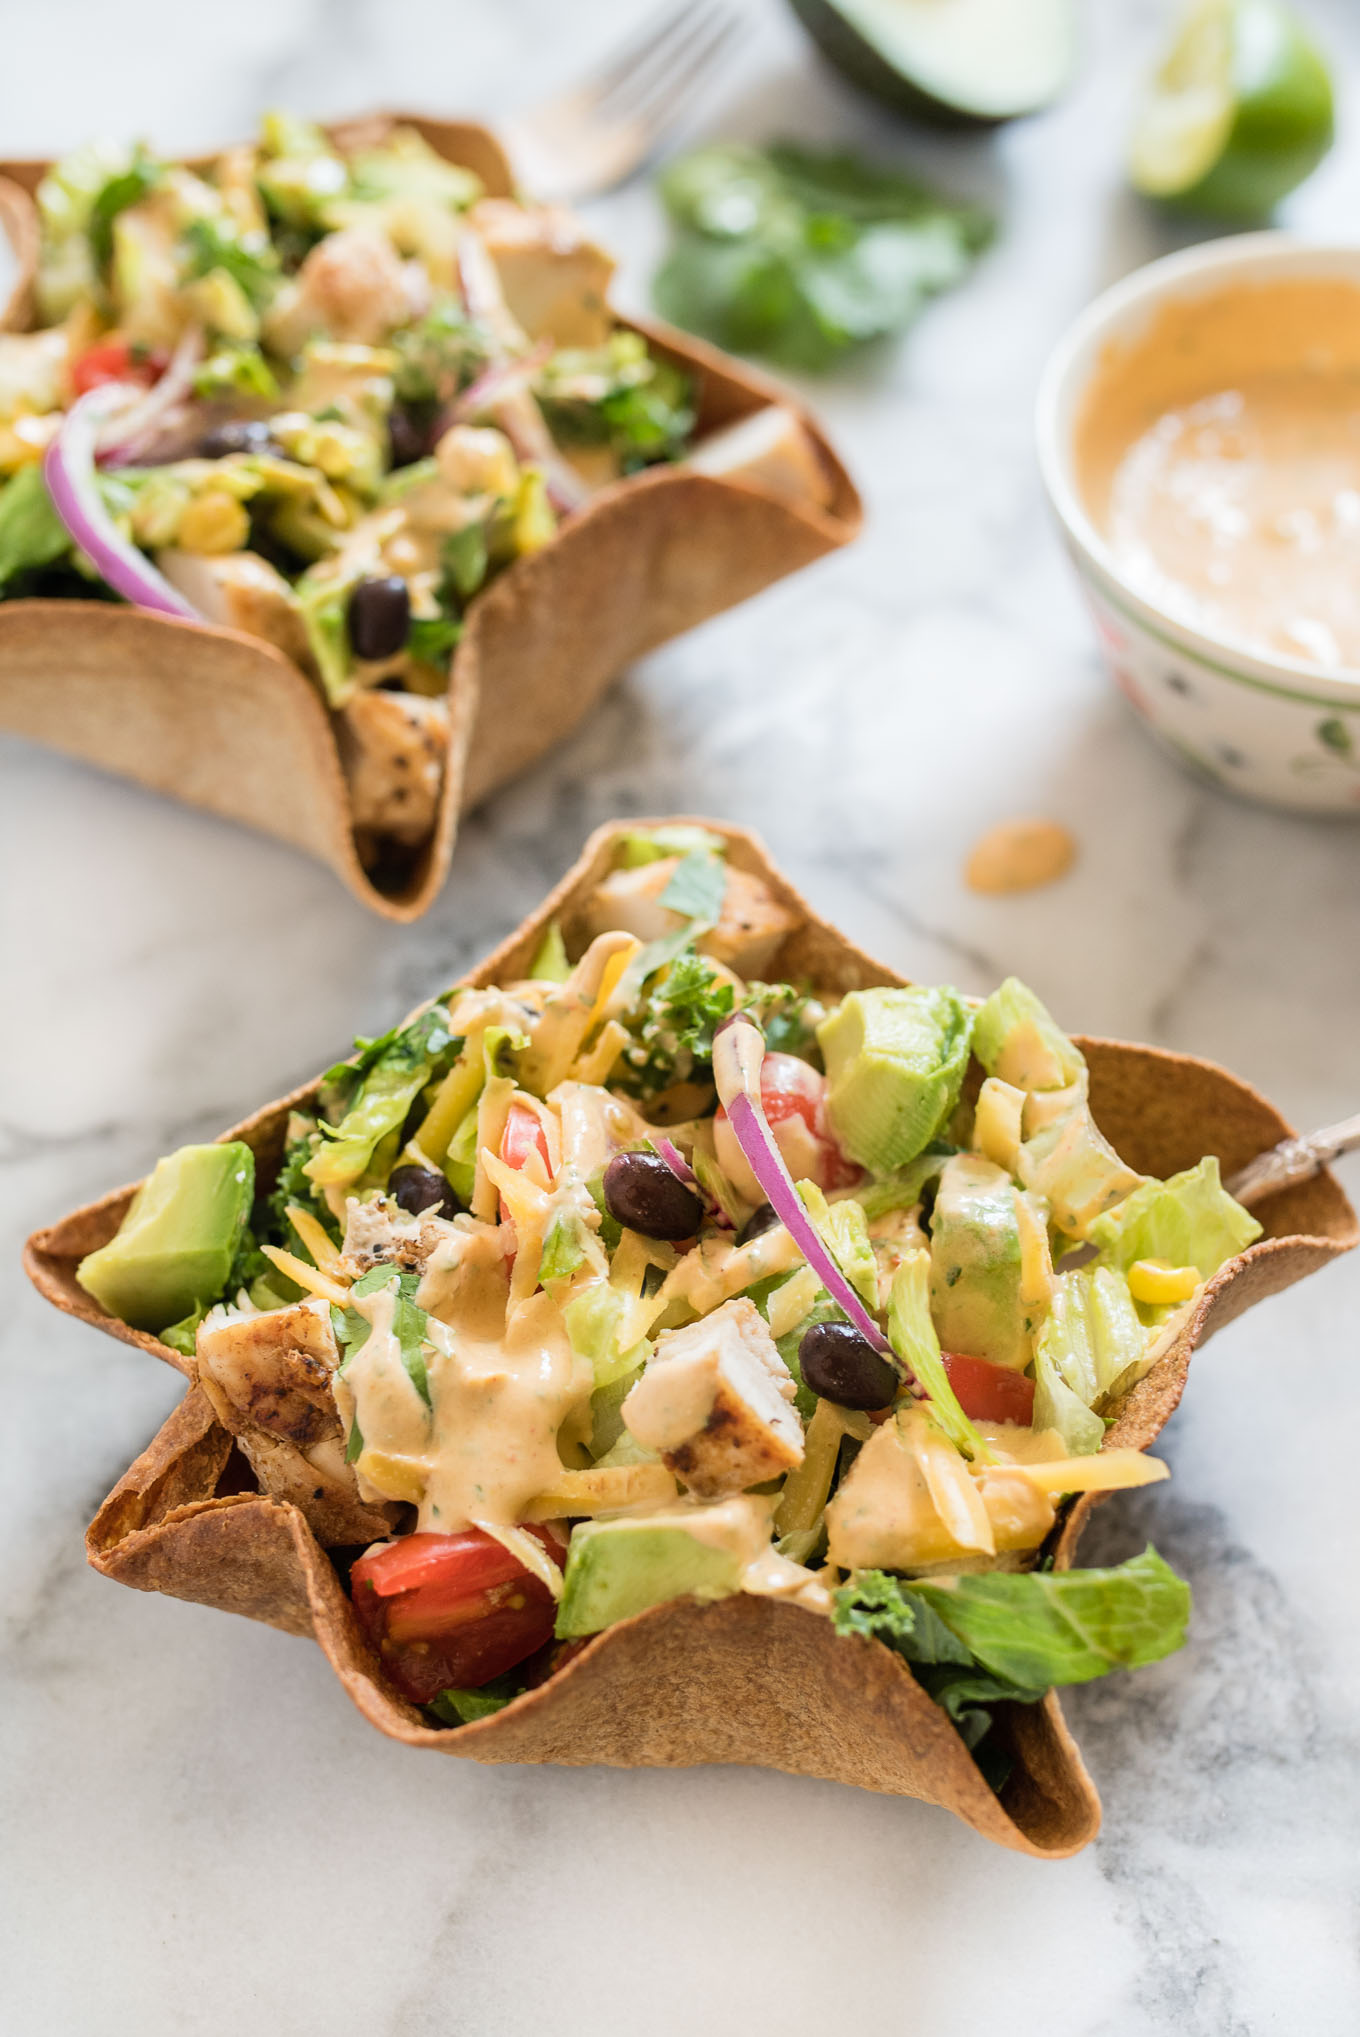 Chicken Taco Salad with Creamy Chipotle Dressing is delicious hearty salad, packed with flavor from the chicken, black beans, avocado and creamy spicy chipotle dressing.